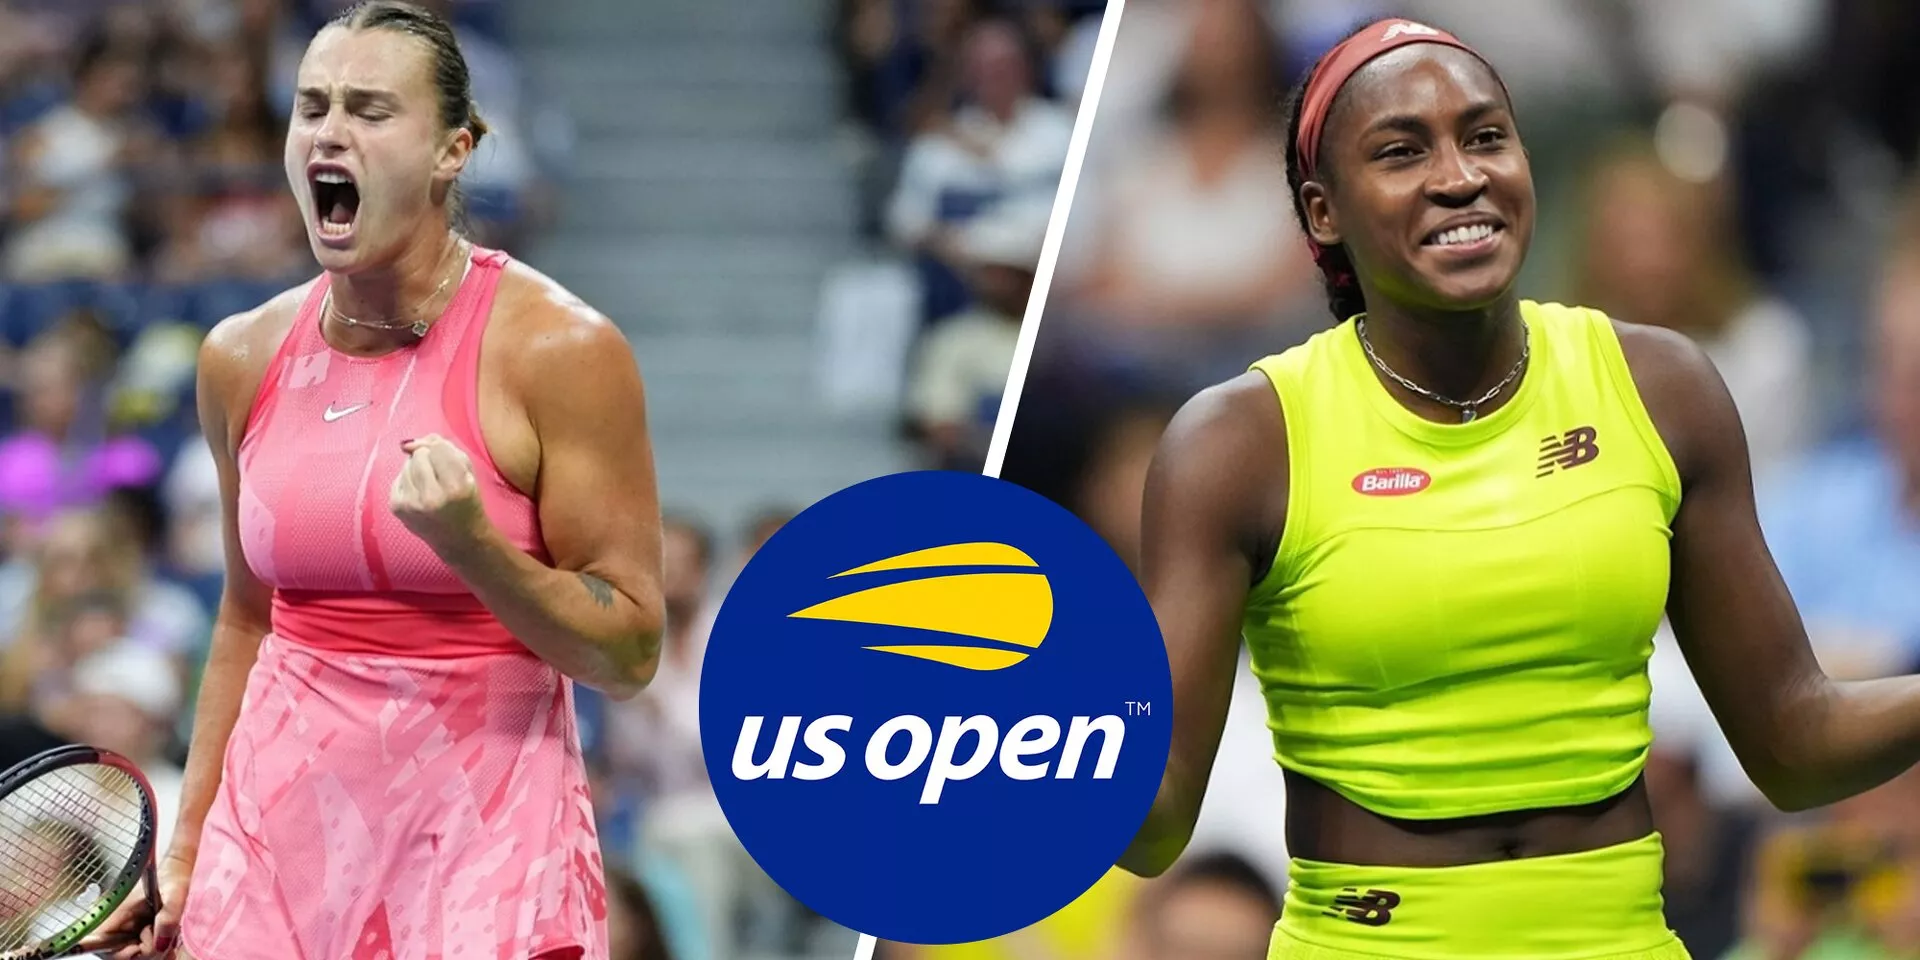 US Open 2023 Home favourite Coco Gauff to face Aryna Sabalenka in womens singles championship match